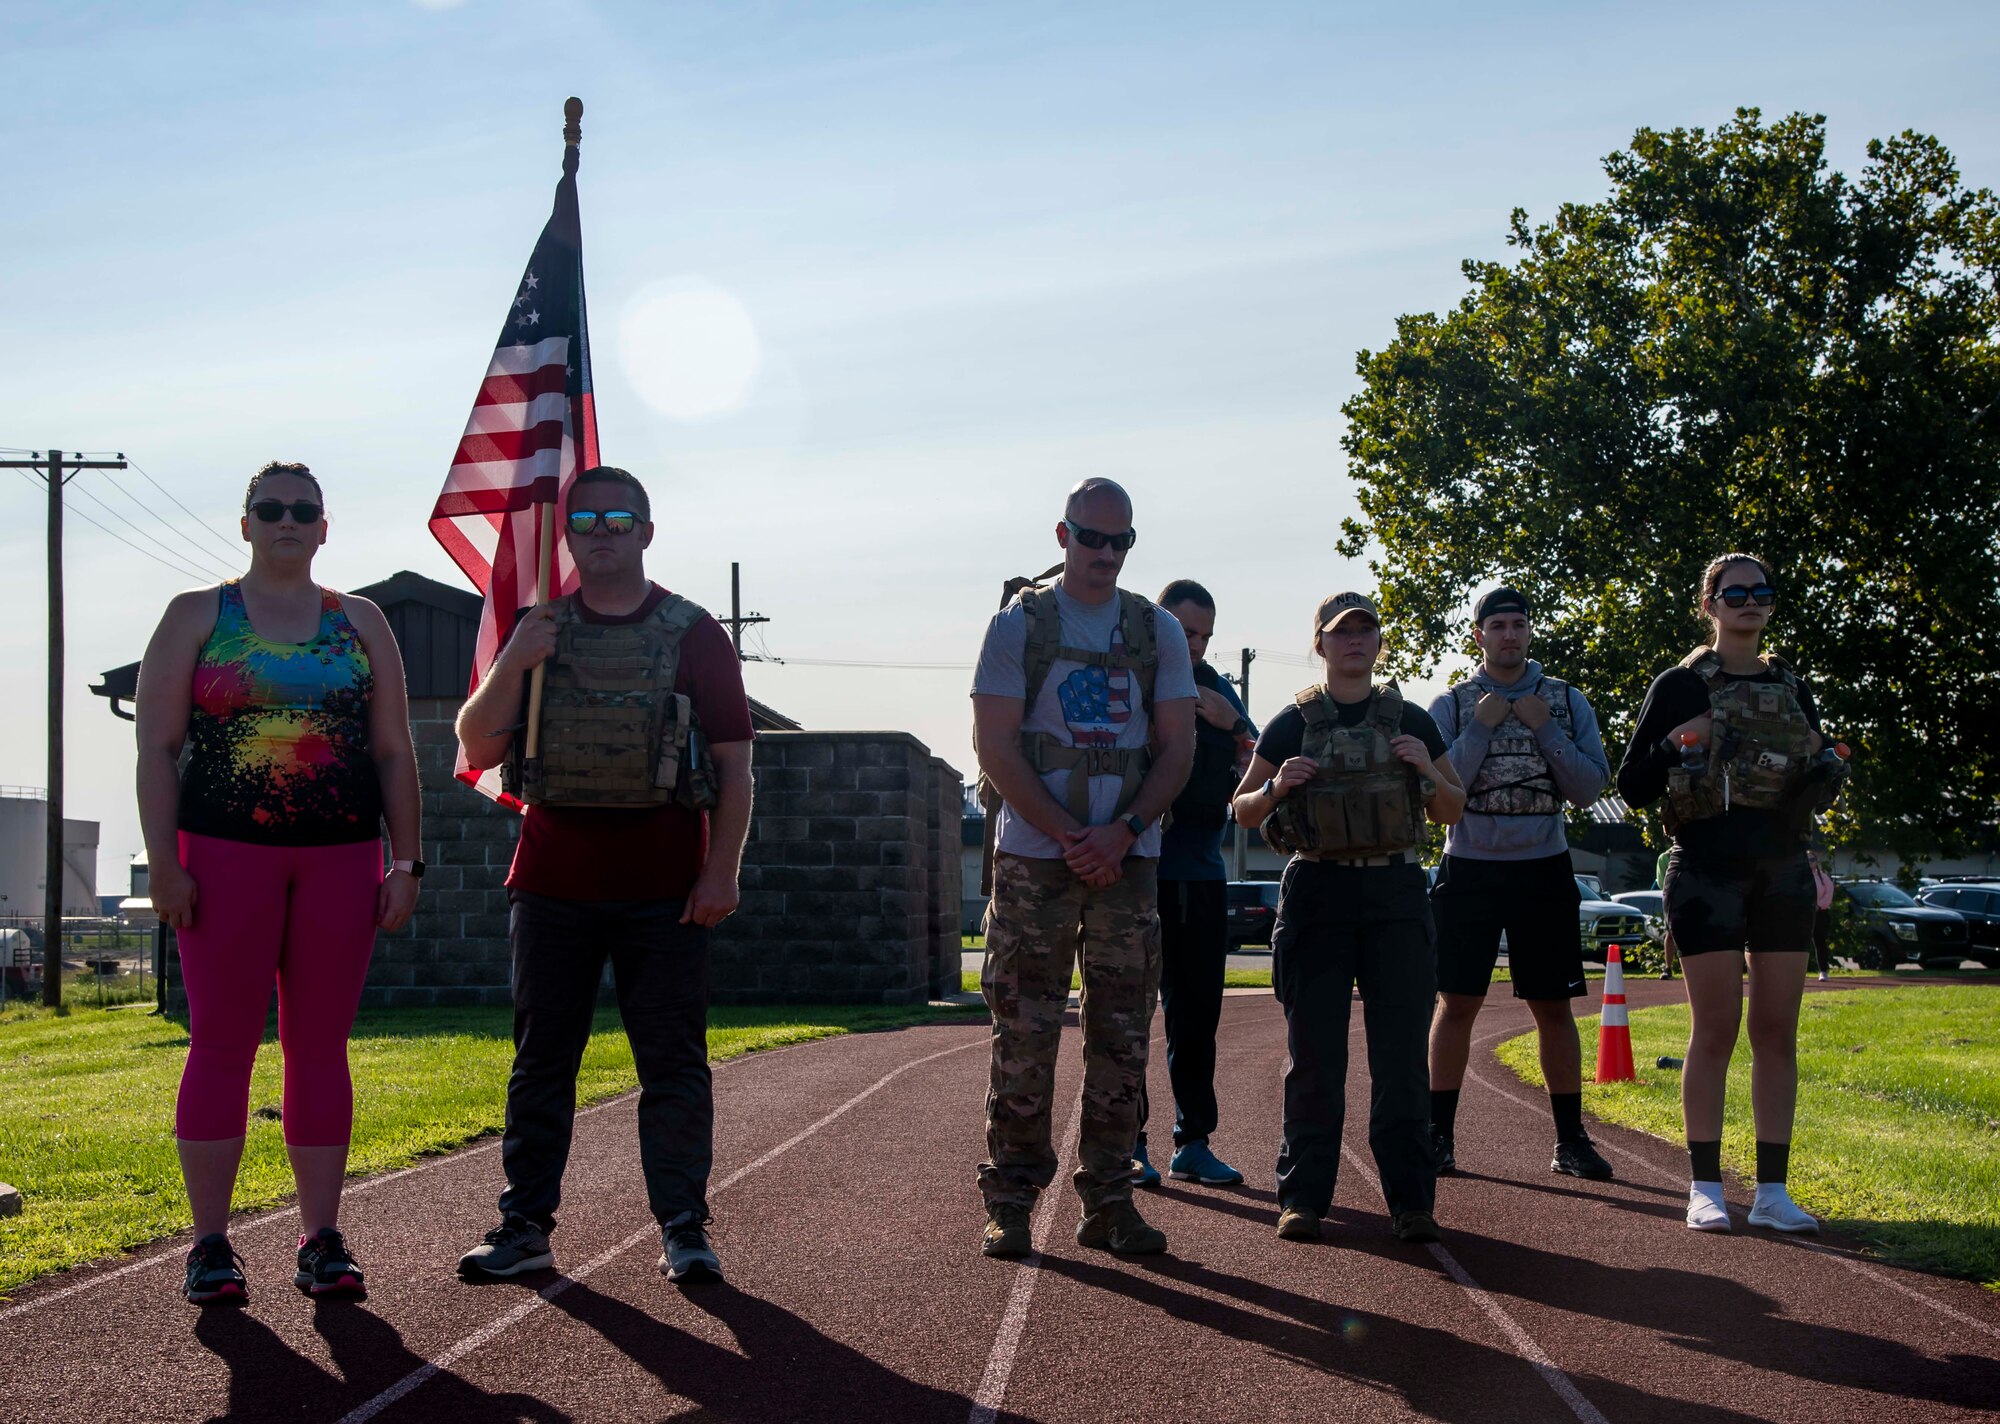 Team Dover members pause at 9:03 a.m. to signify the second World Trade Center Tower being struck during the 9/11 Remembrance Ruck March on Dover Air Force Base, Delaware, Sept. 11, 2021. Units from Team Dover rucked in 30-minute increments for more than 25 hours, remembering and honoring those who perished in the attacks on Sept. 11, 2001. (U.S. Air Force photo by Senior Airman Stephani Barge)